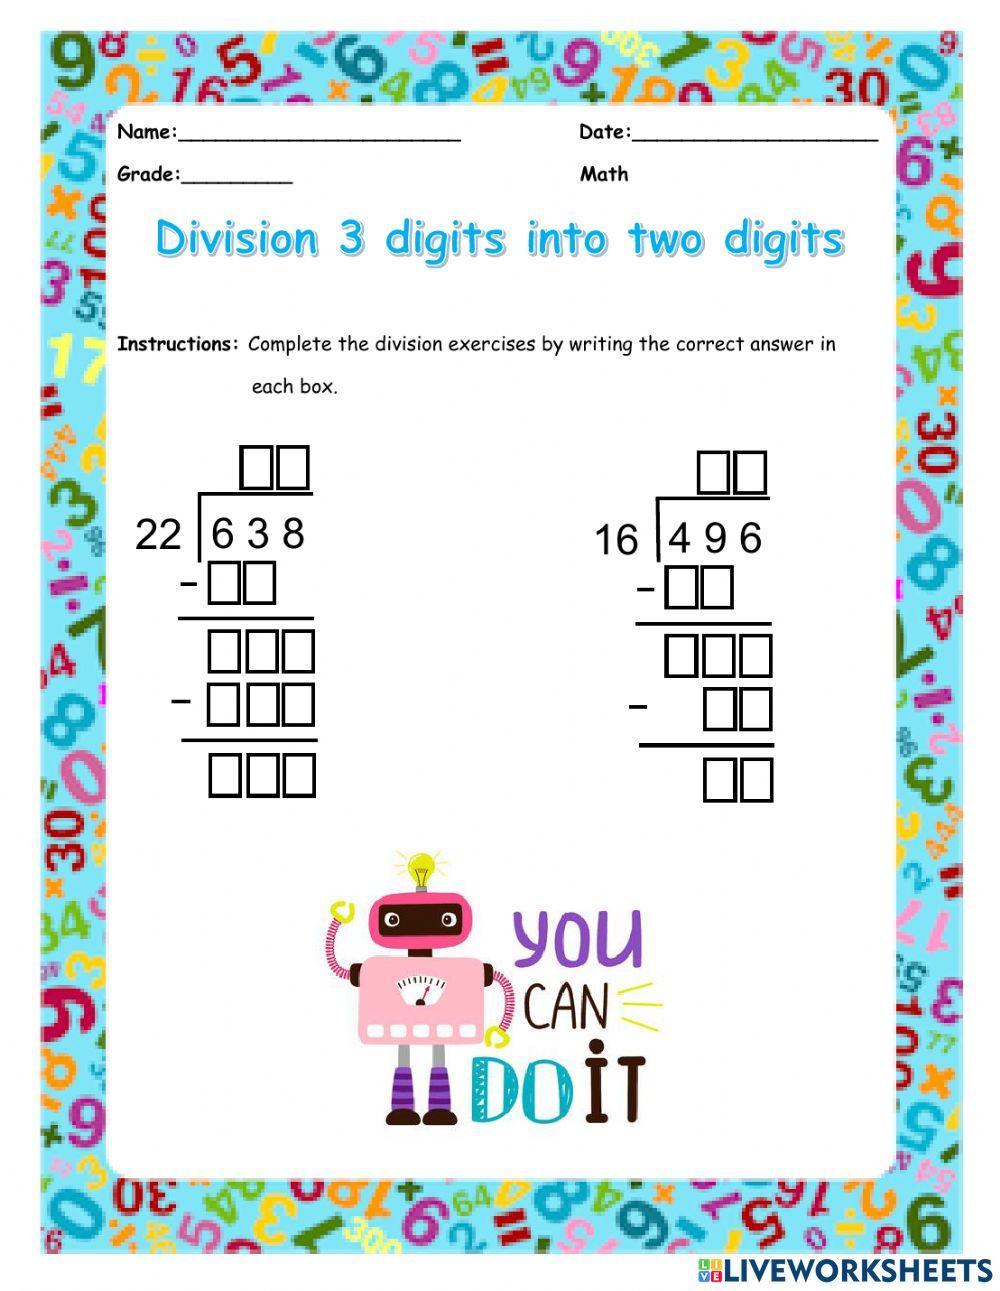 Division 3 digits into 2 digits